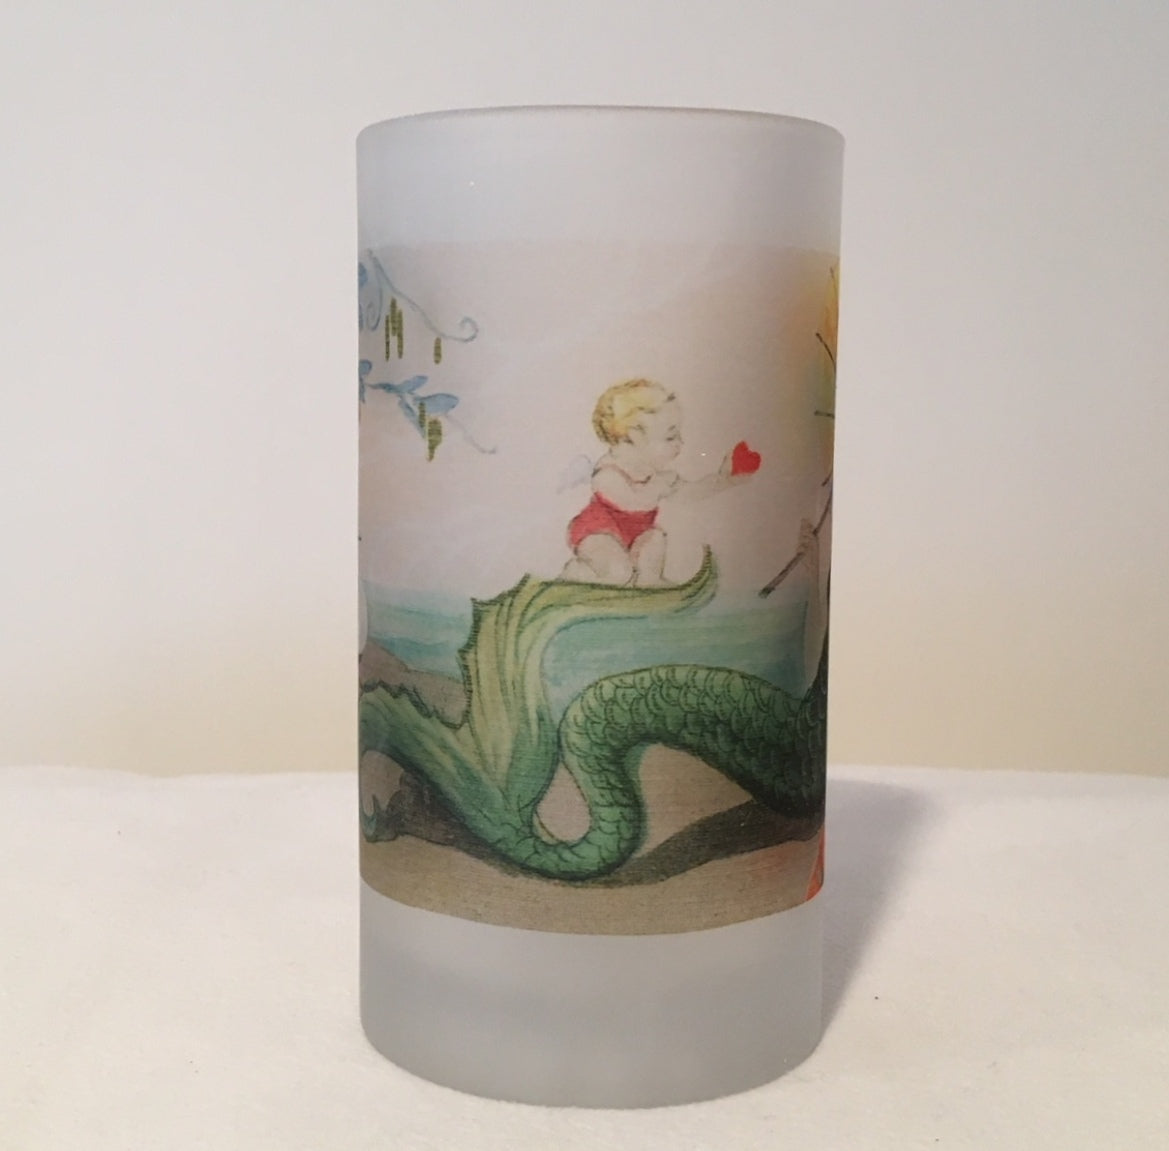 Colorful Frosted Glass Mug Of Art Deco Mermaid And Cupid - That Fabled Shore Home Decor